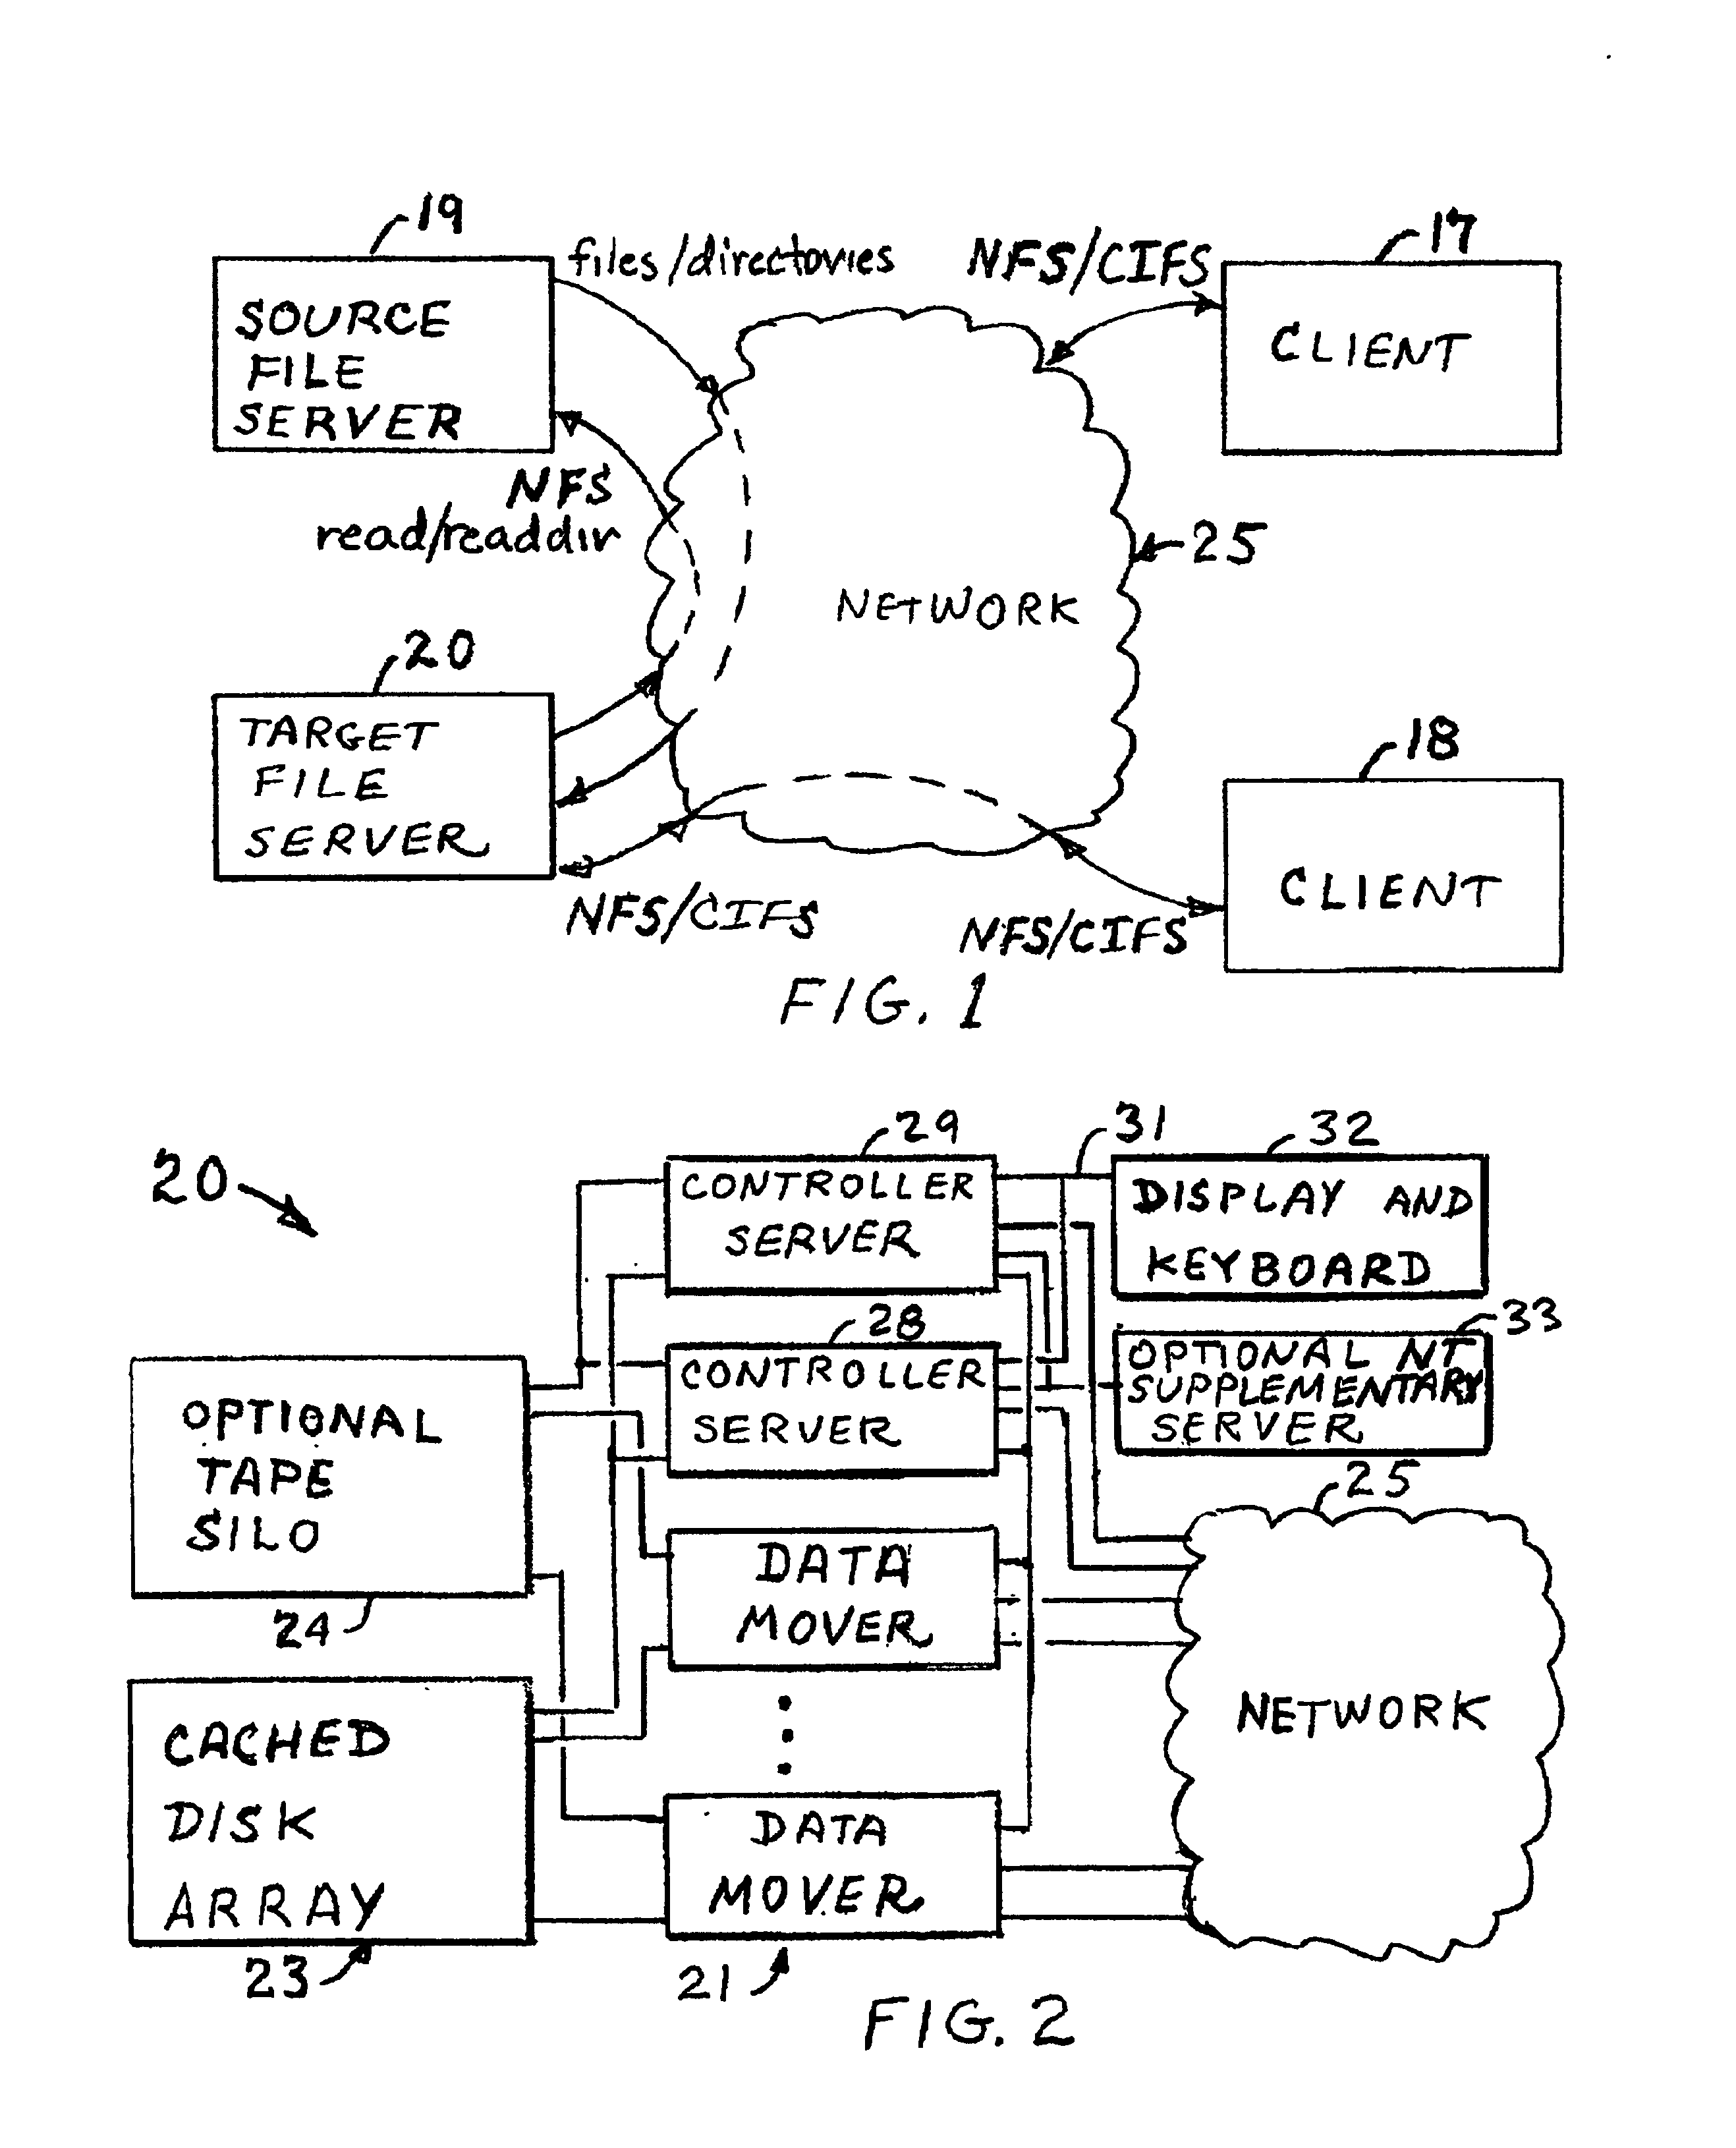 Concurrent file across at a target file server during migration of file systems between file servers using a network file system access protocol